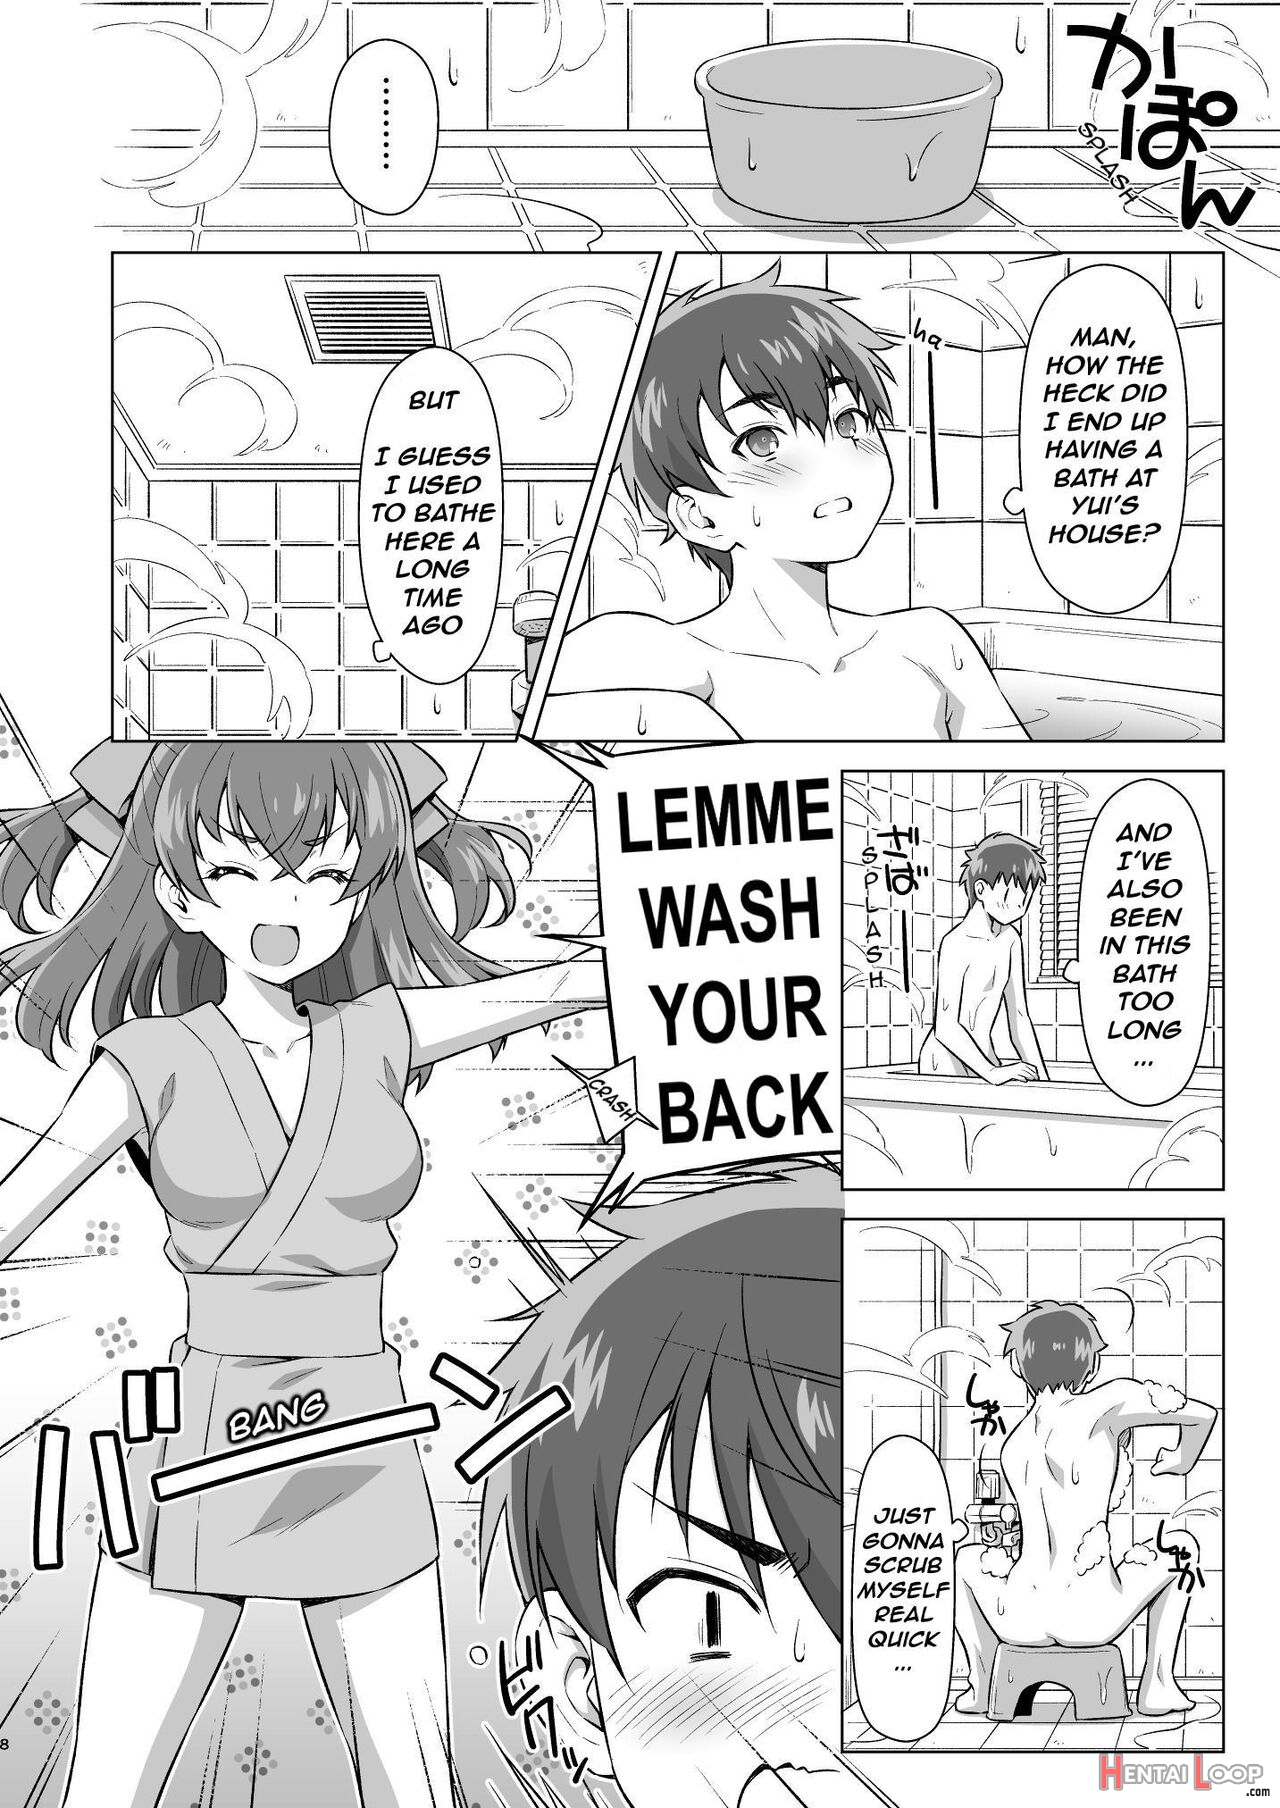 Sharing The Bath With A Childhood Friend. page 8